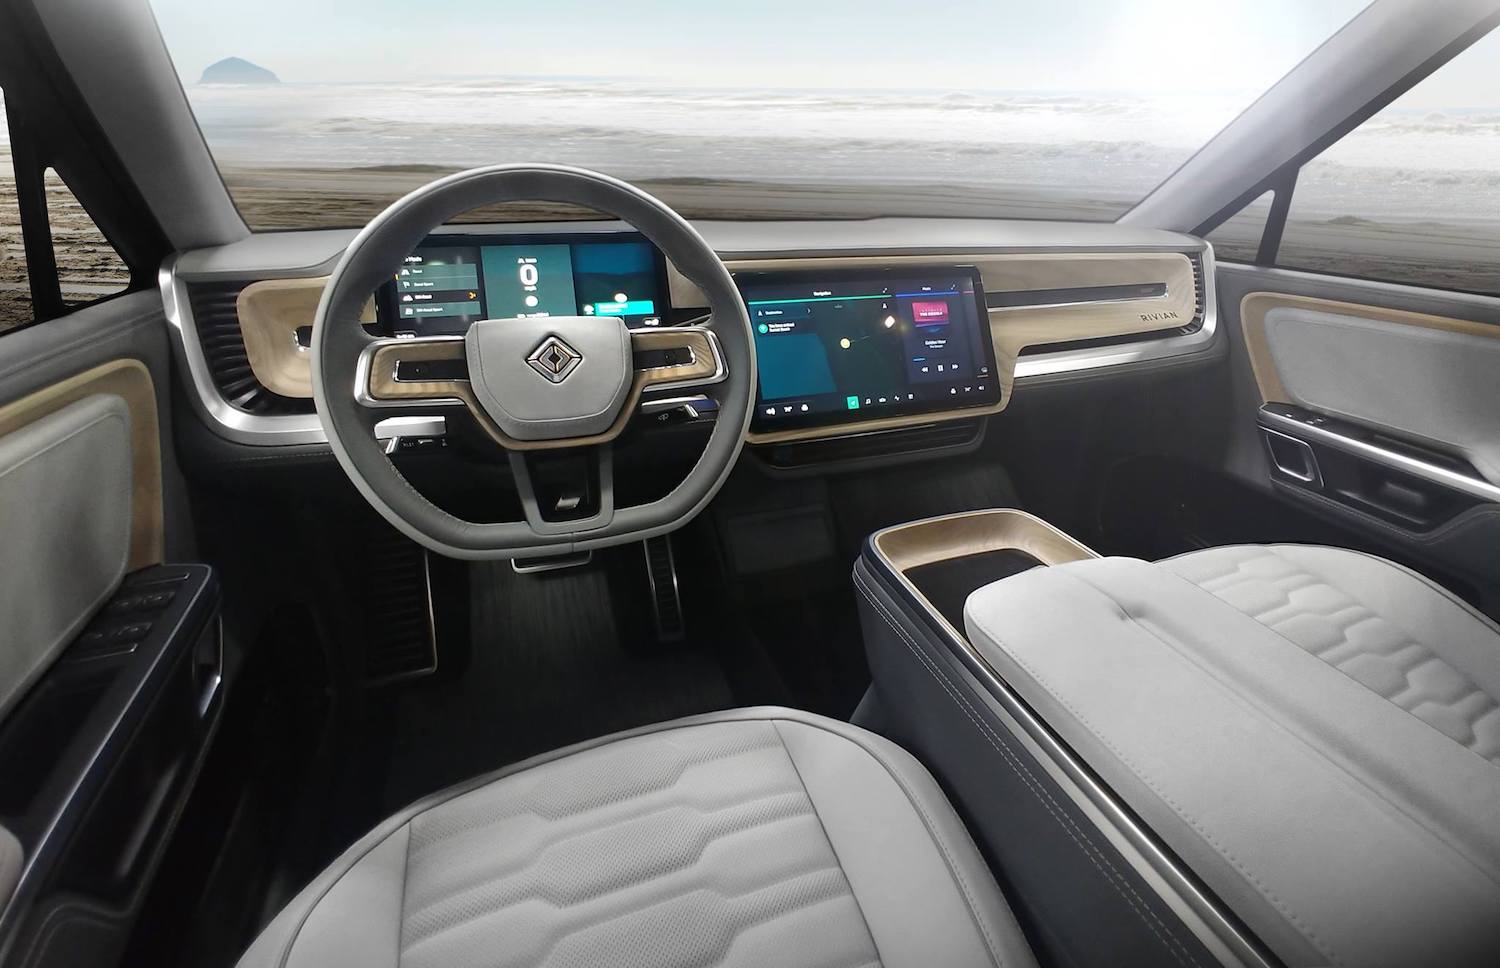 This is a promo photo of The Rivian Interior In The R1T Electric Pickup, parked by the ocean | Rivian